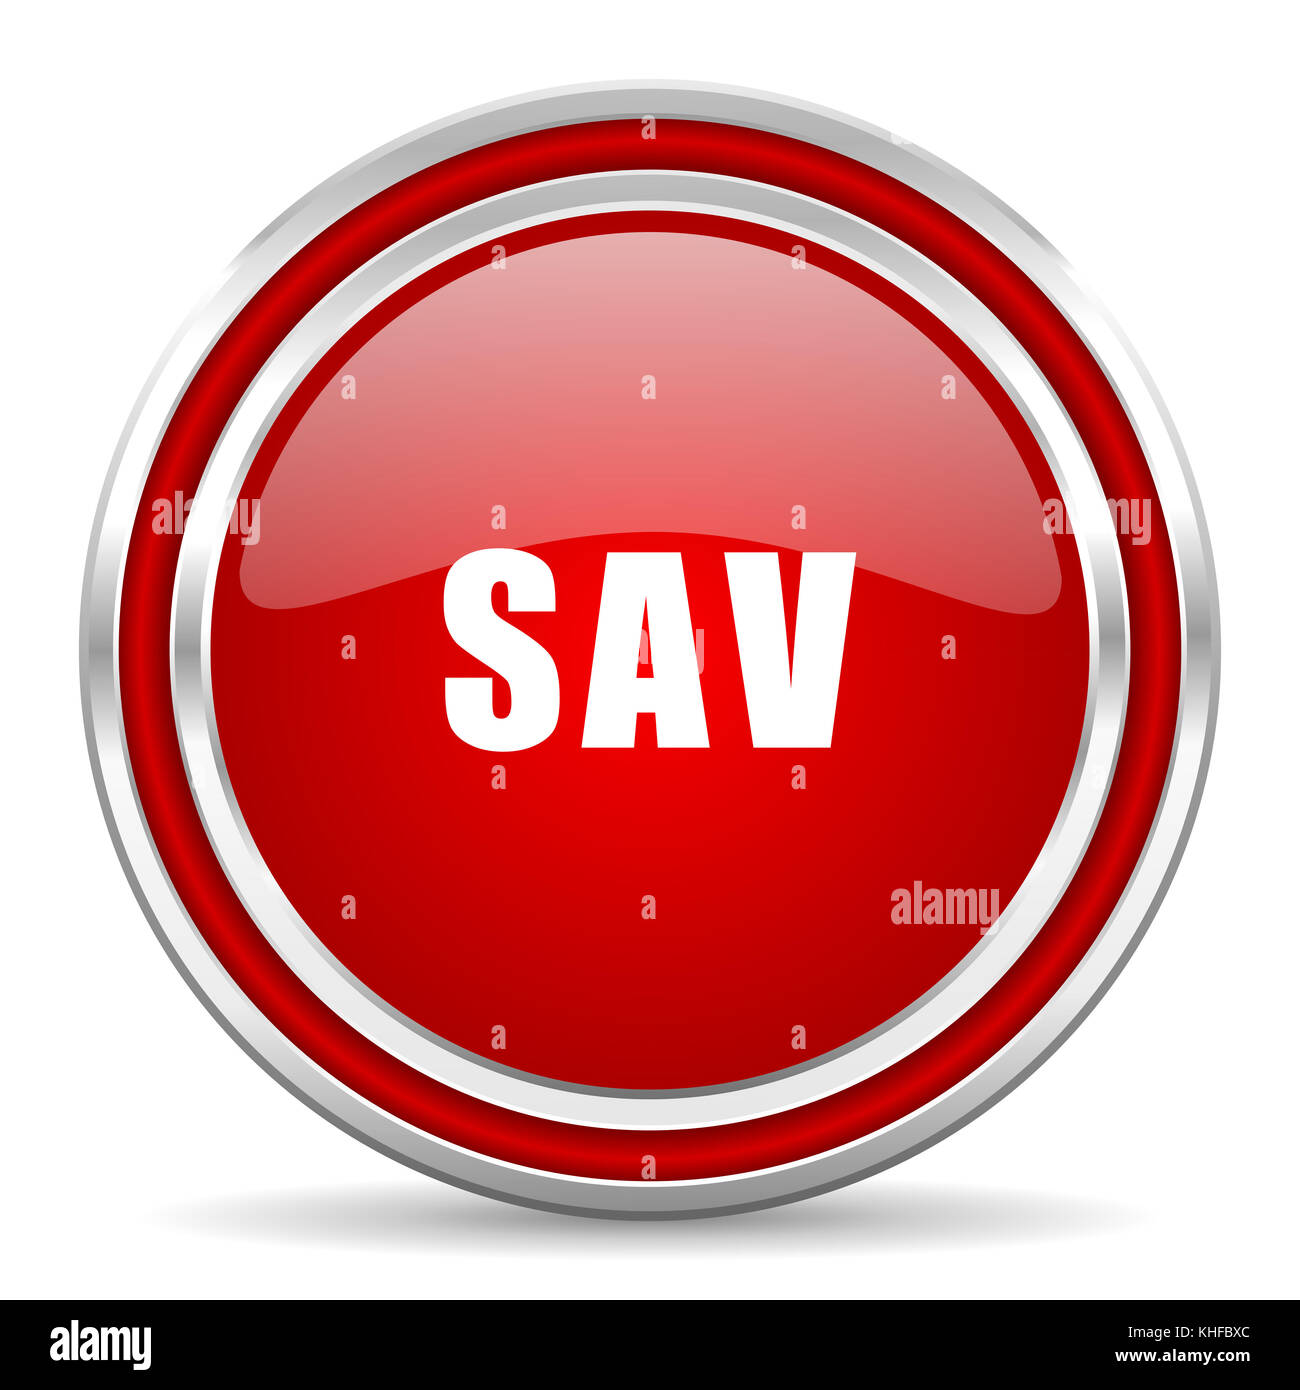 Sav red silver metallic chrome border web and mobile phone icon on white background with shadow Stock Photo